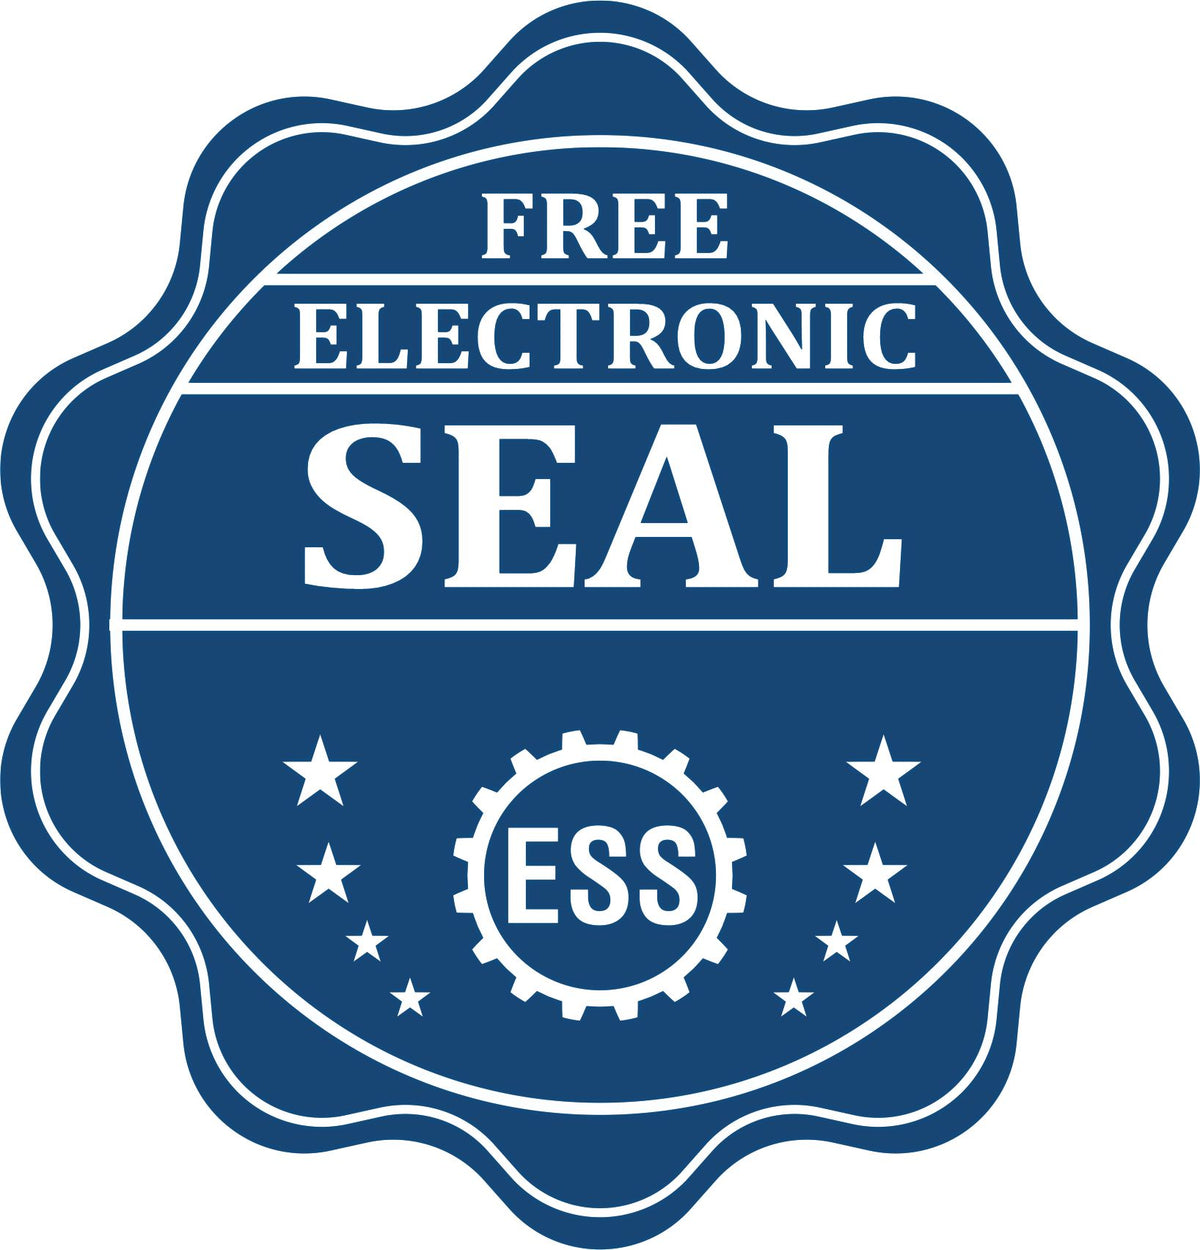 A badge showing a free electronic seal for the PSI Pennsylvania Notary Stamp with stars and the ESS gear on the emblem.